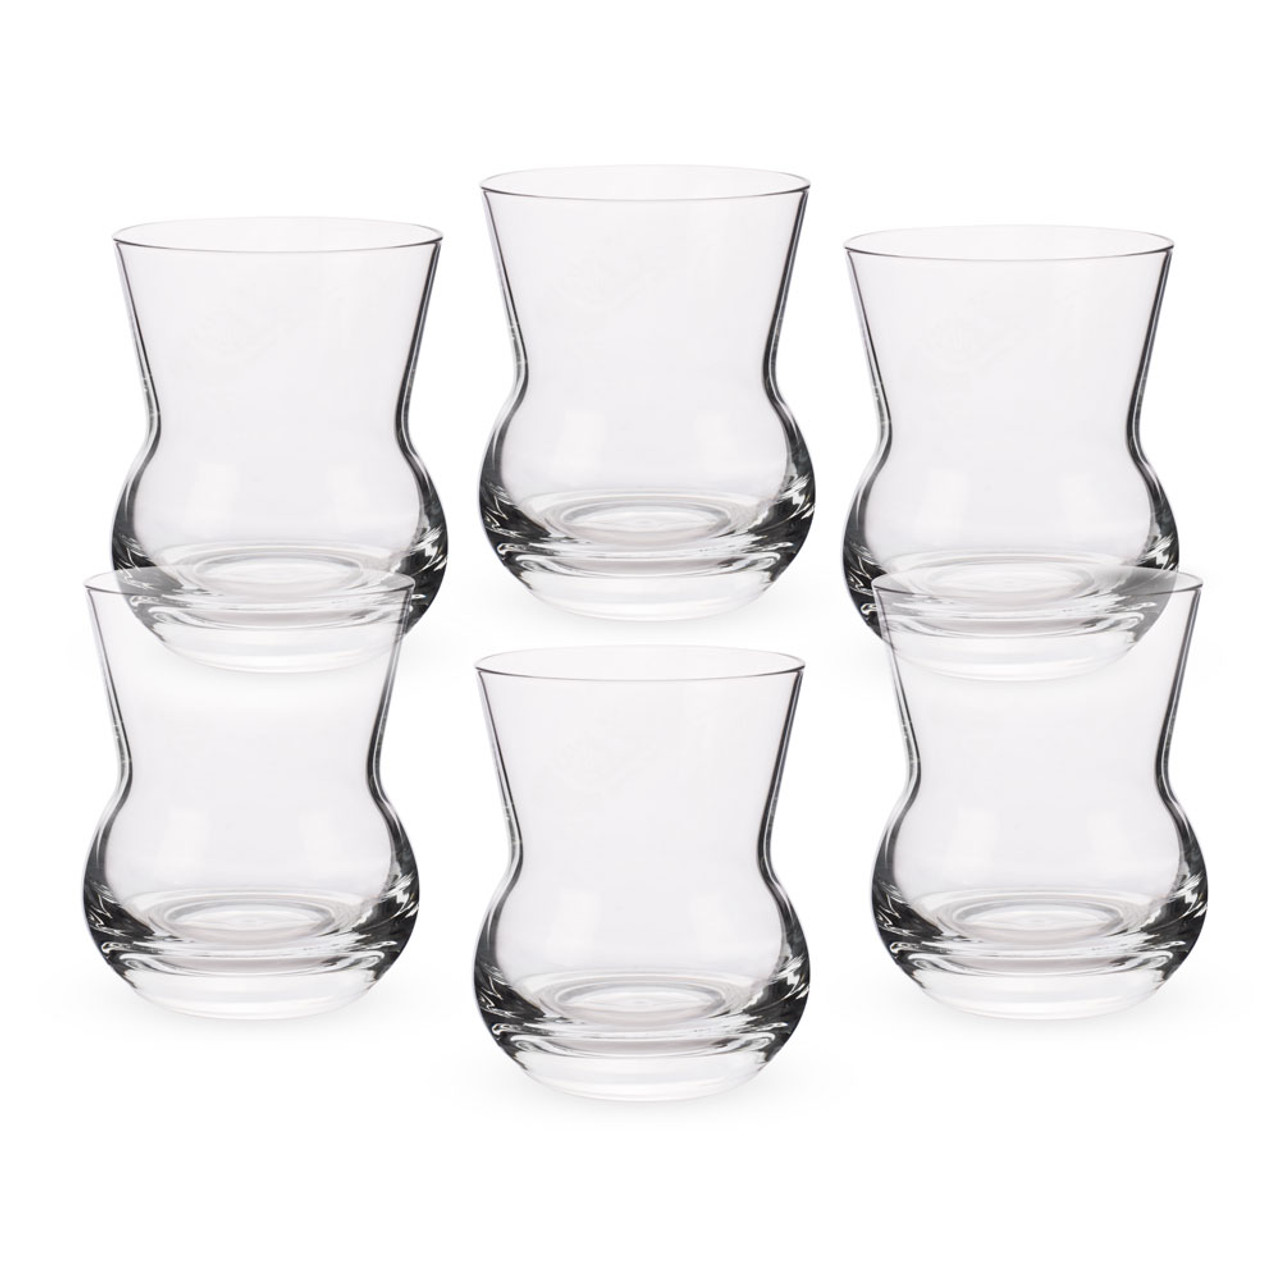 Pack of 6 Small Whisky Glass for Serving Samples and Tasters Urban Bar Thistle Dram Whisky Glass 12cl 